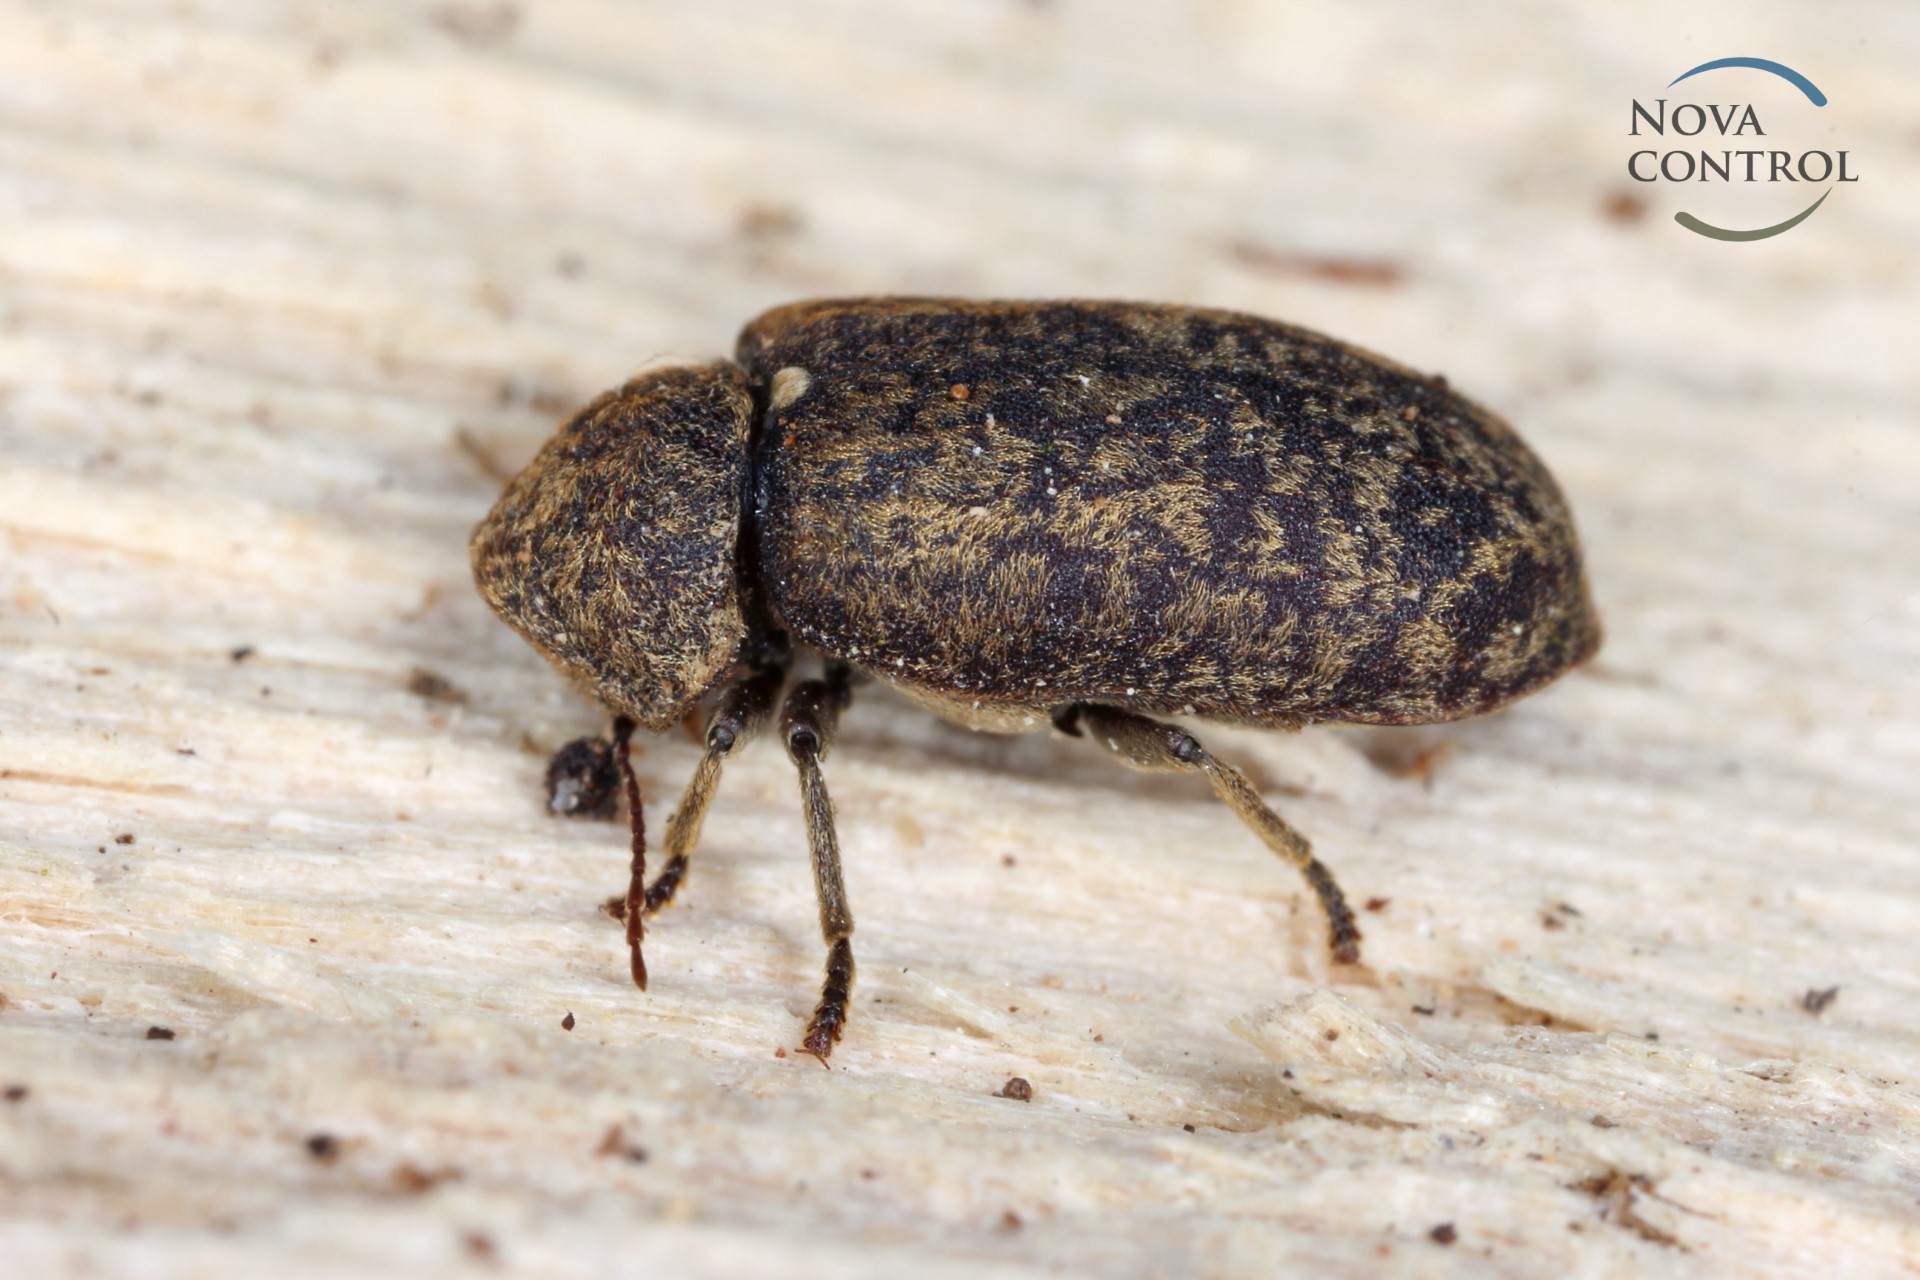 Death watch beetle - Xestobium rufovillosum on wood. It is a woodboring beetle from family Anobiidae.